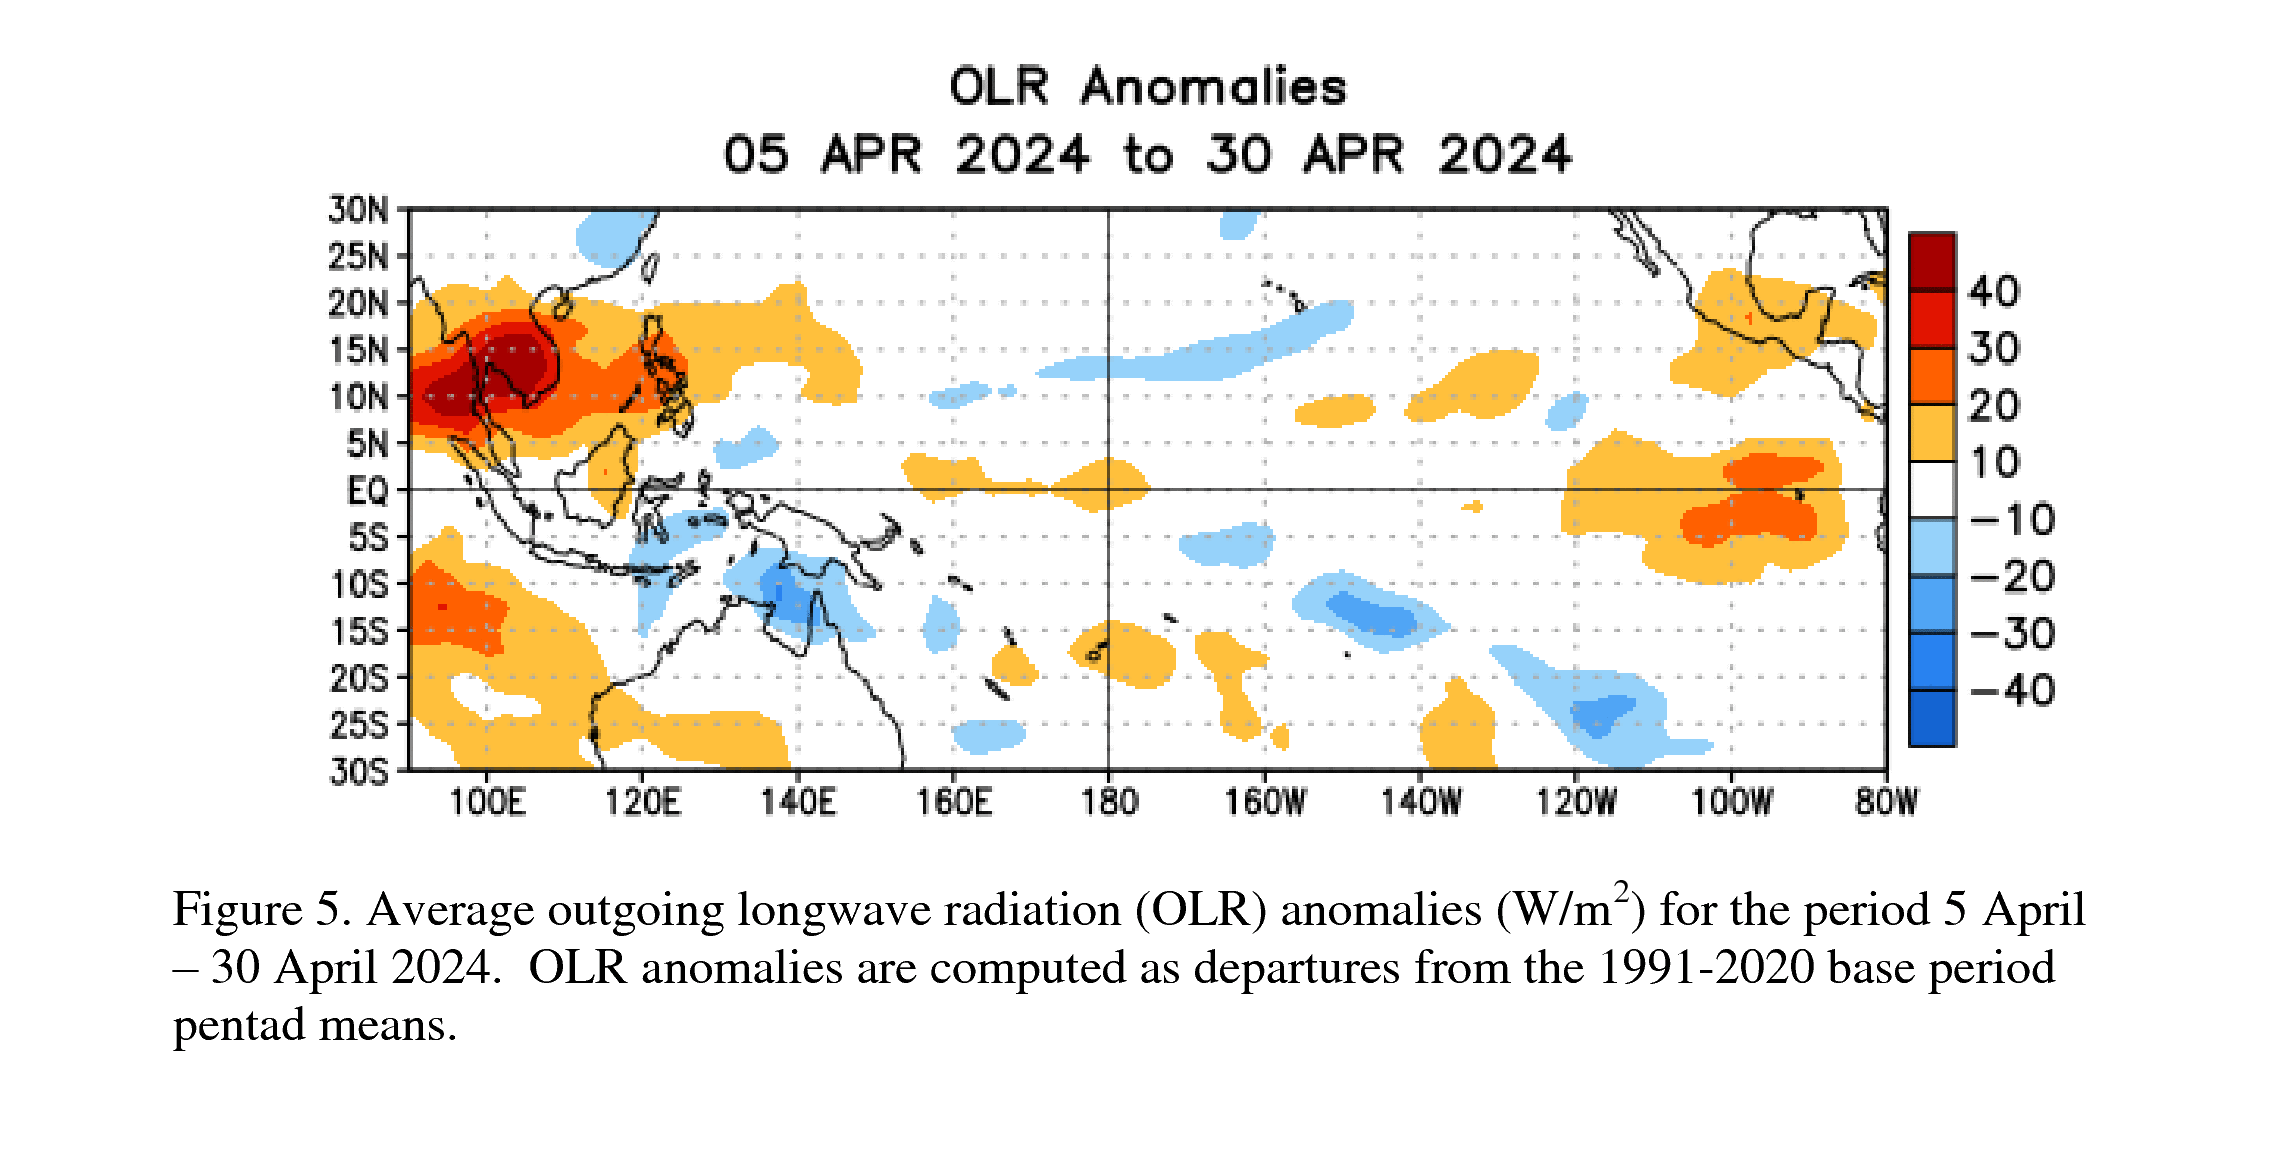 http://www.cpc.ncep.noaa.gov/products/analysis_monitoring/enso_advisory/figure05.gif